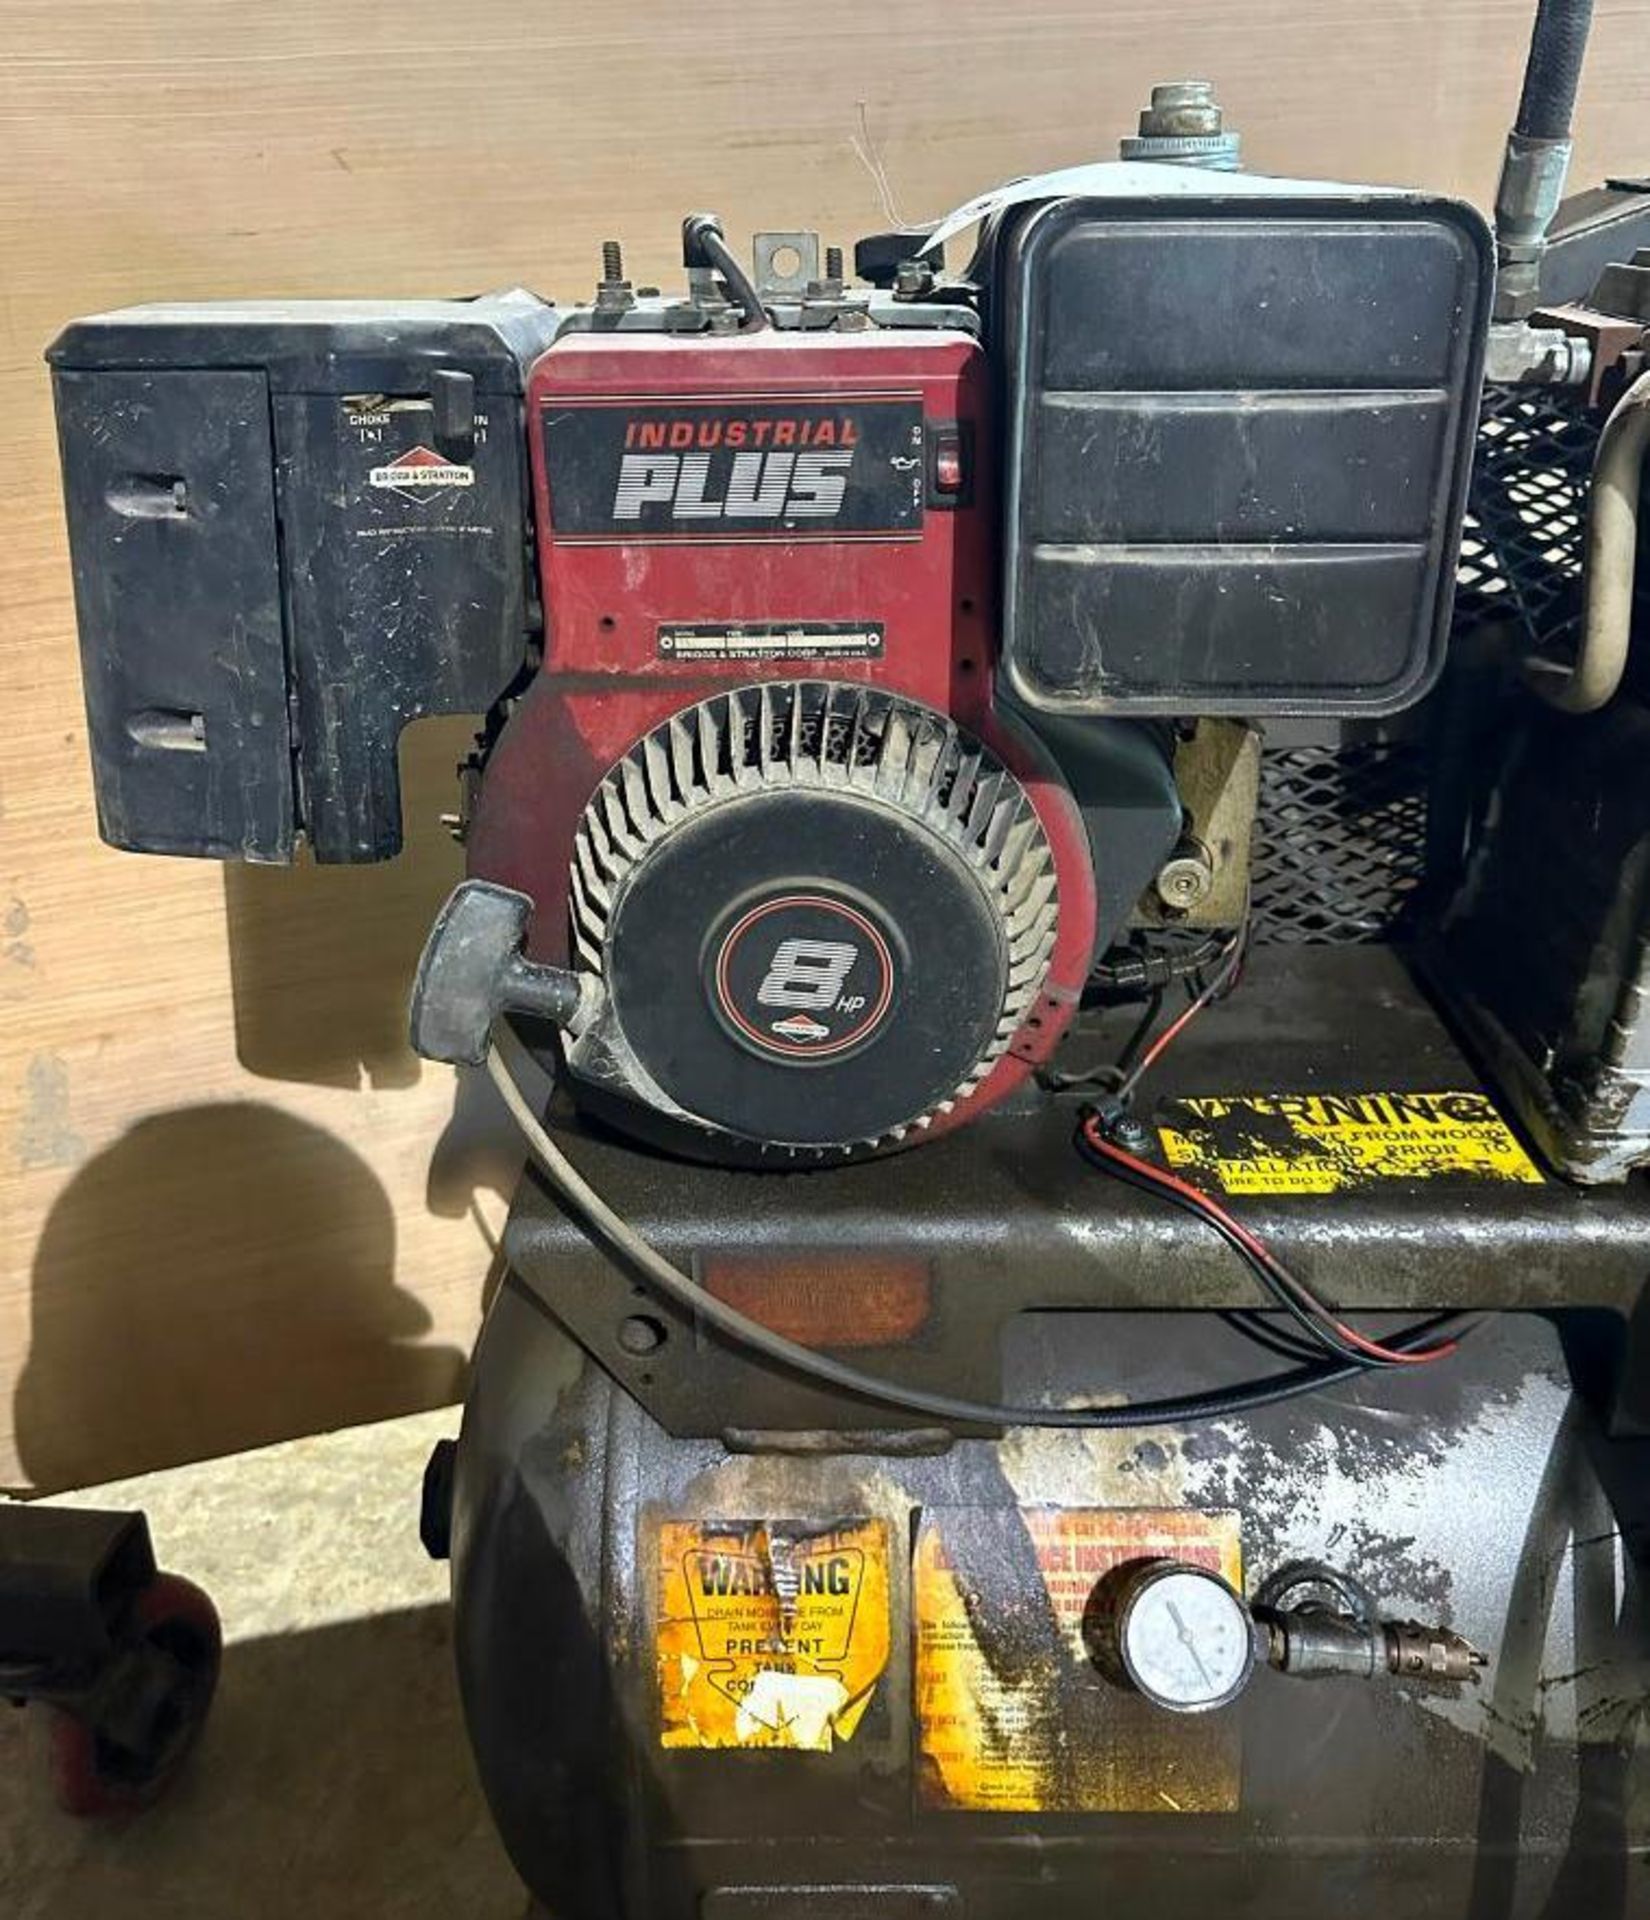 Industrial Plus horizontal air compressor, with Briggs & Stratton 8hp gas engine, runs and operates - Image 2 of 4